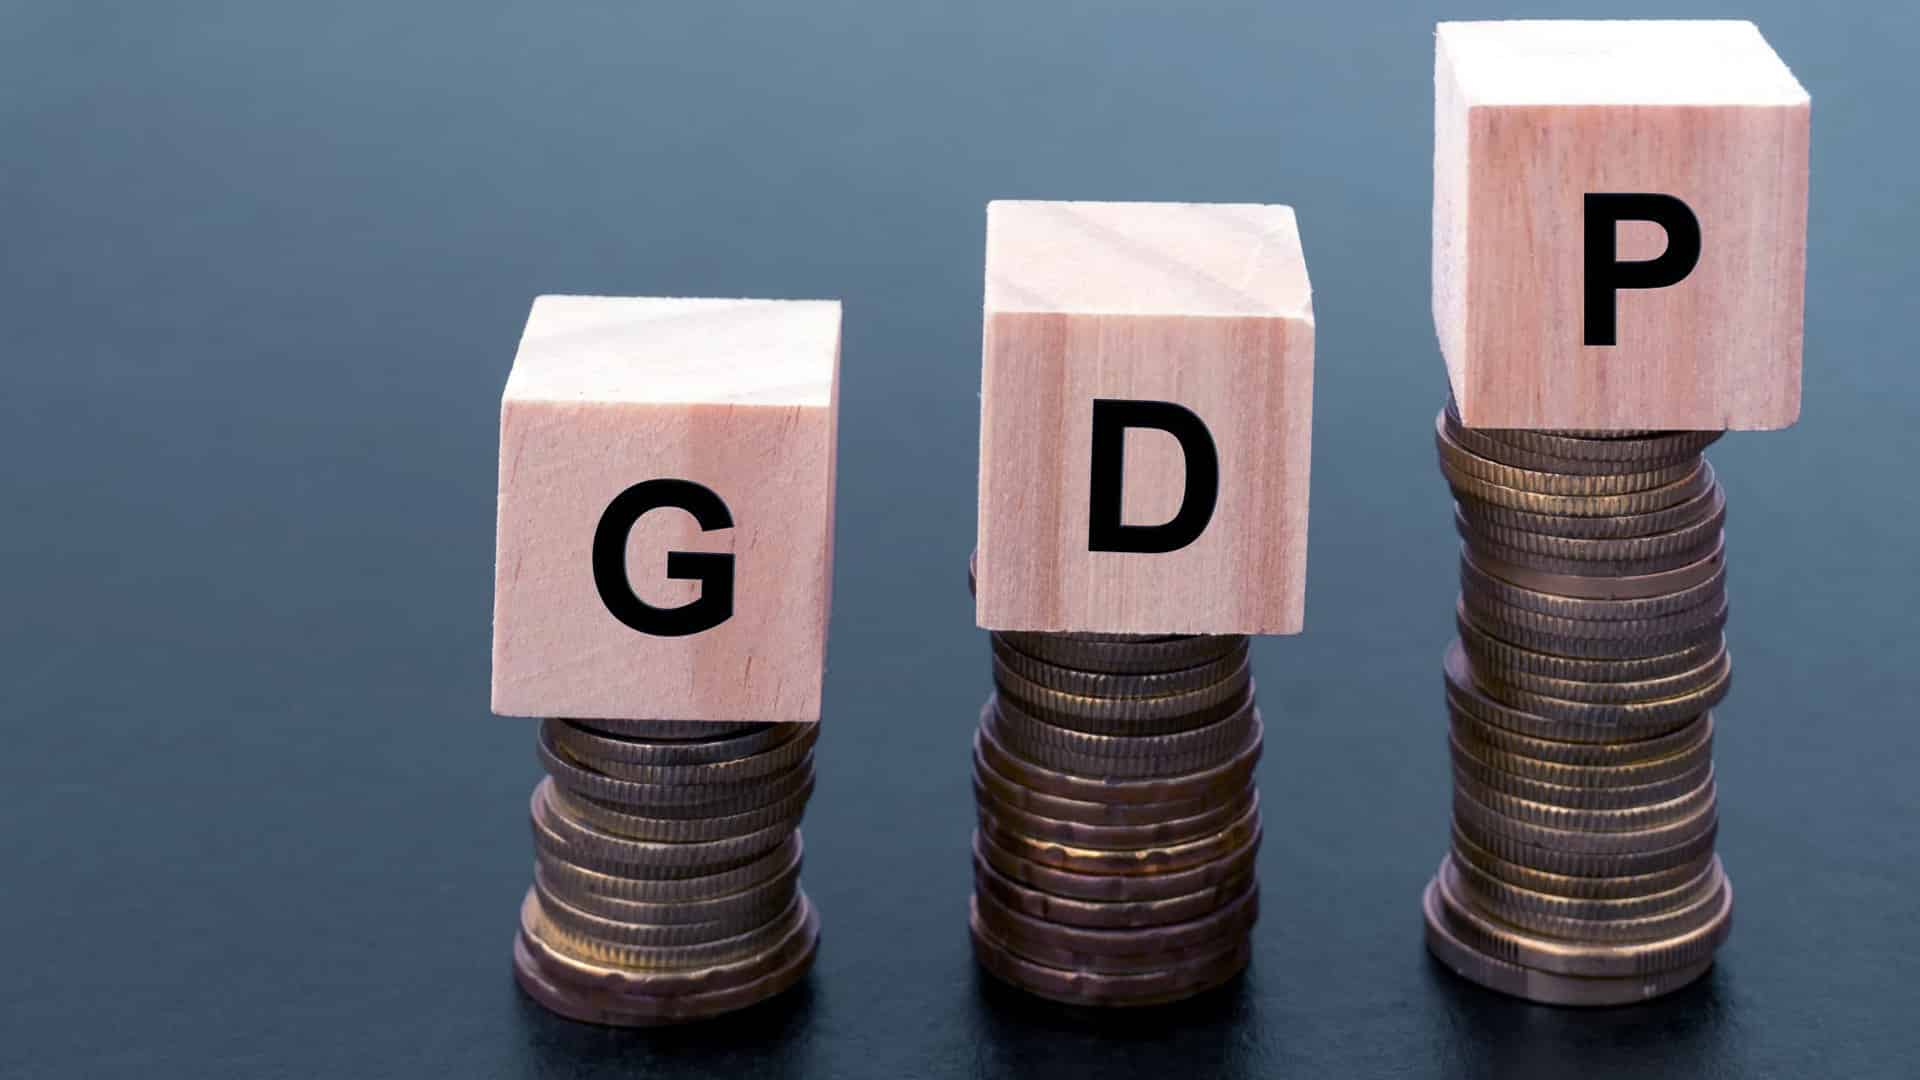 Indian GDP to grow 7.8 pc in Q2, 9.4 pc in FY22: Report